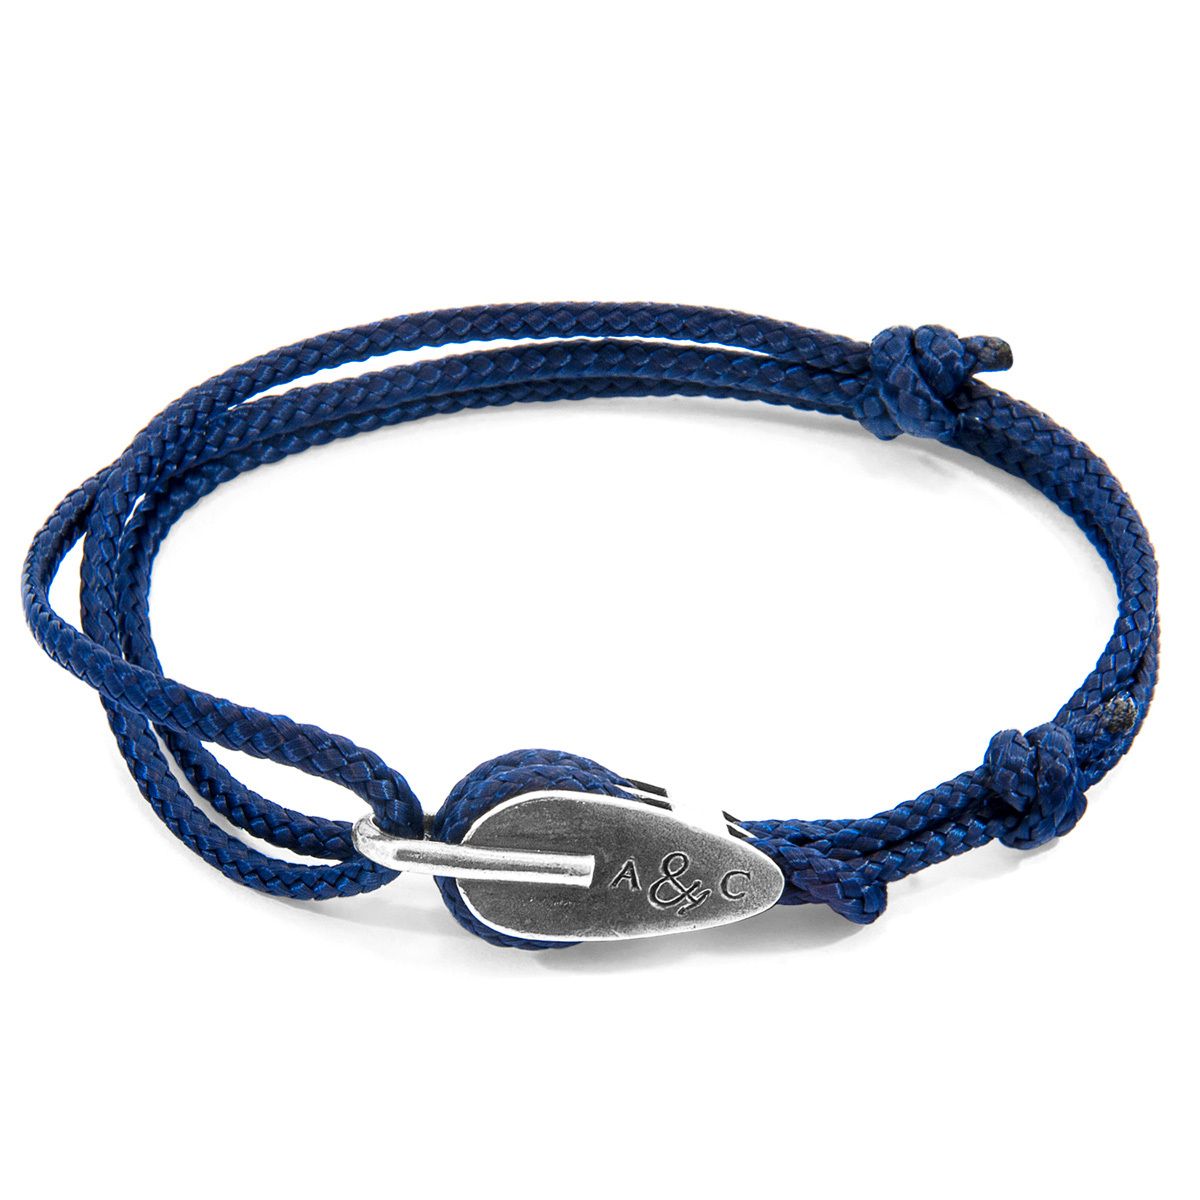 The Tyne Silver and Rope Bracelet was both designed and skilfully handcrafted completely in Great Britain, In Quality We Trust. For the Modern Journeyman (and woman), ANCHOR & CREW takes ownership of an exploratory lifestyle and enjoys the Happy-Good Life. Combining British craft manufacturing with a discerning modern-minimalist style, this ANCHOR & CREW bracelet features:

3mm diameter performance Marine Grade polyester and nylon rope (GB) 
Secure solid .925 sterling silver oversized pulley (GB) 

This bracelet is one size fits all, with the rope able to extend or tighten to suit your wrist size. To take the bracelet on or off your wrist, simply slide the one adjustable knot around the rope to make the loop size smaller or larger. The rope adjusts itself by feeding freely through the large bar of the pulley clasp.